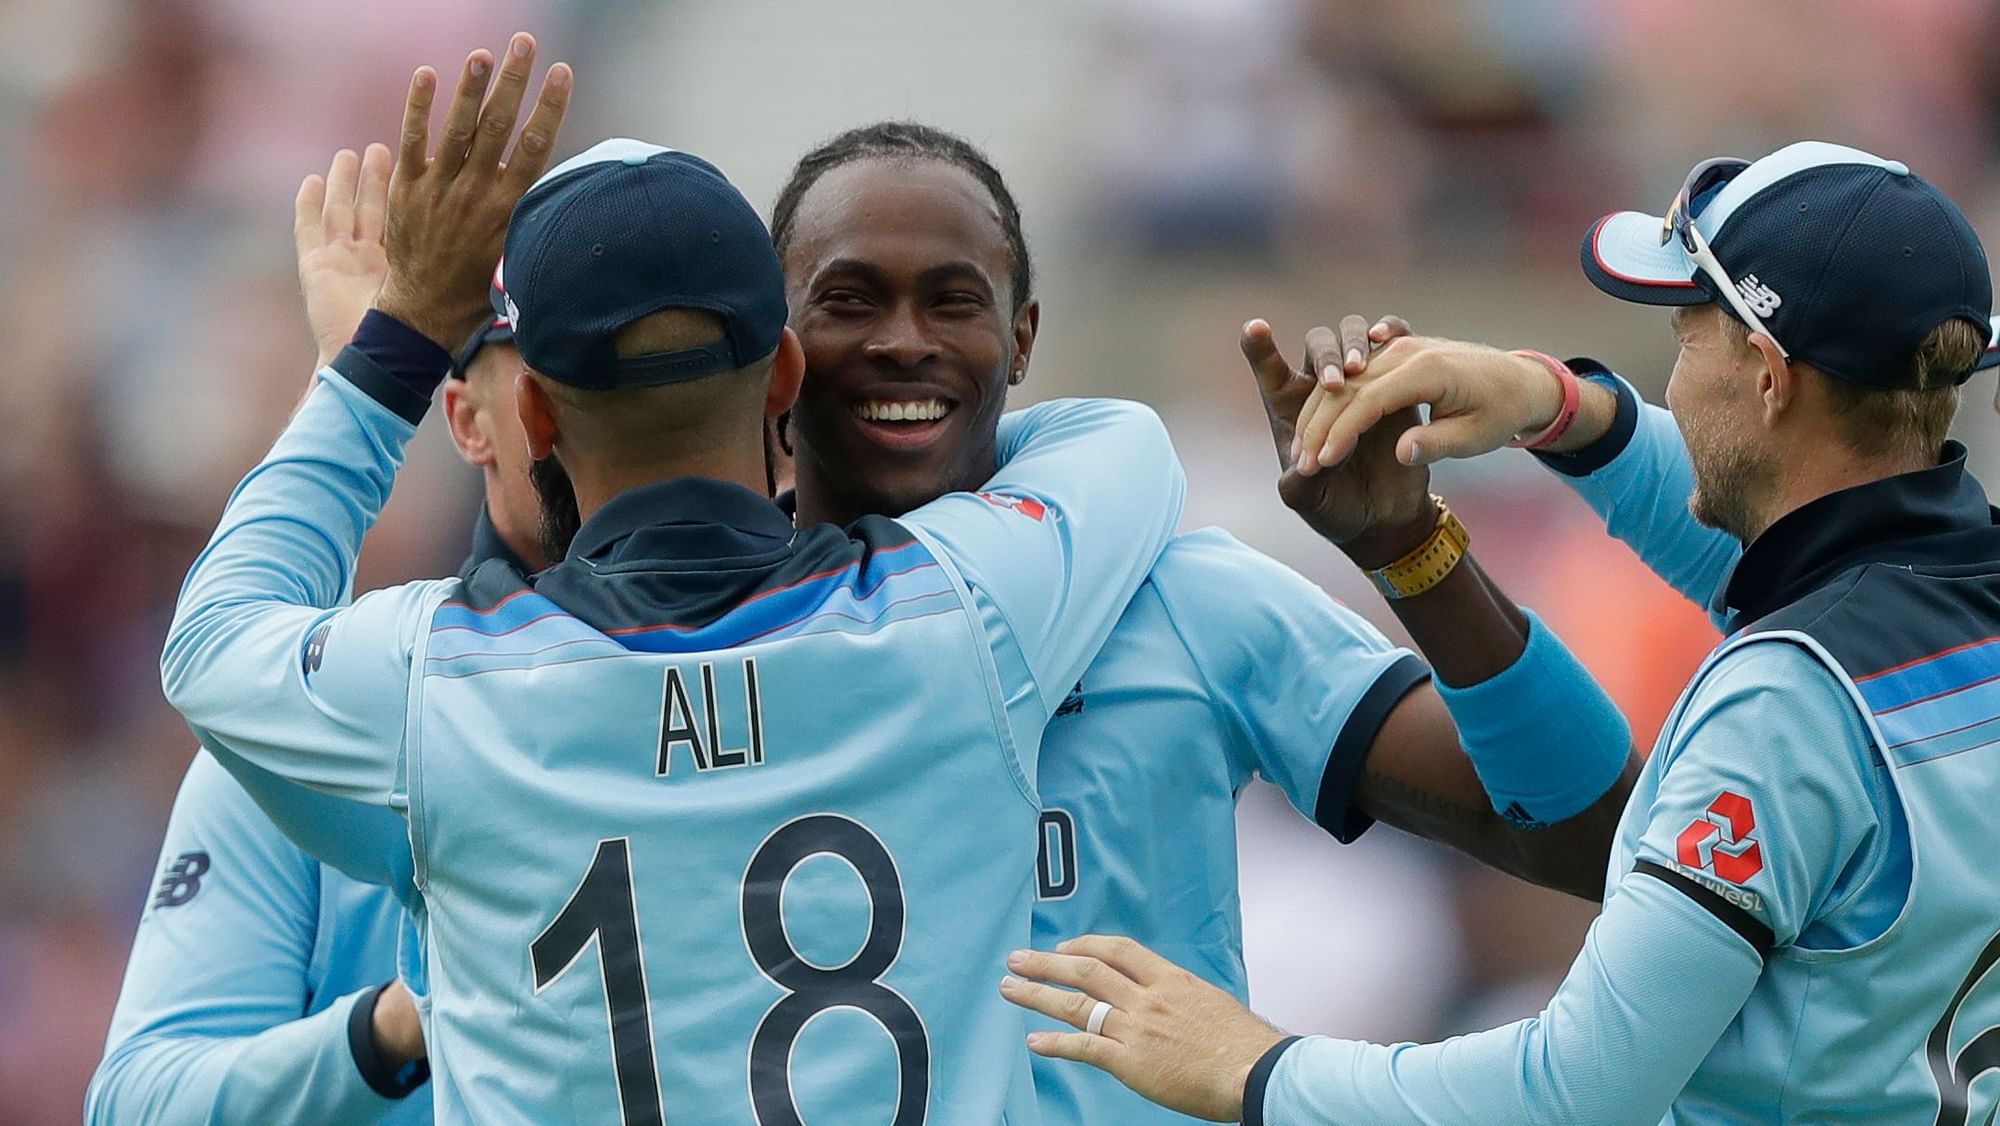 England’s Jofra Archer, second left, celebrates taking the wicket of South Africa’s Rassie van der Dussen during the World Cup cricket match between England and South Africa at The Oval in London, Thursday, May 30, 2019.&nbsp;